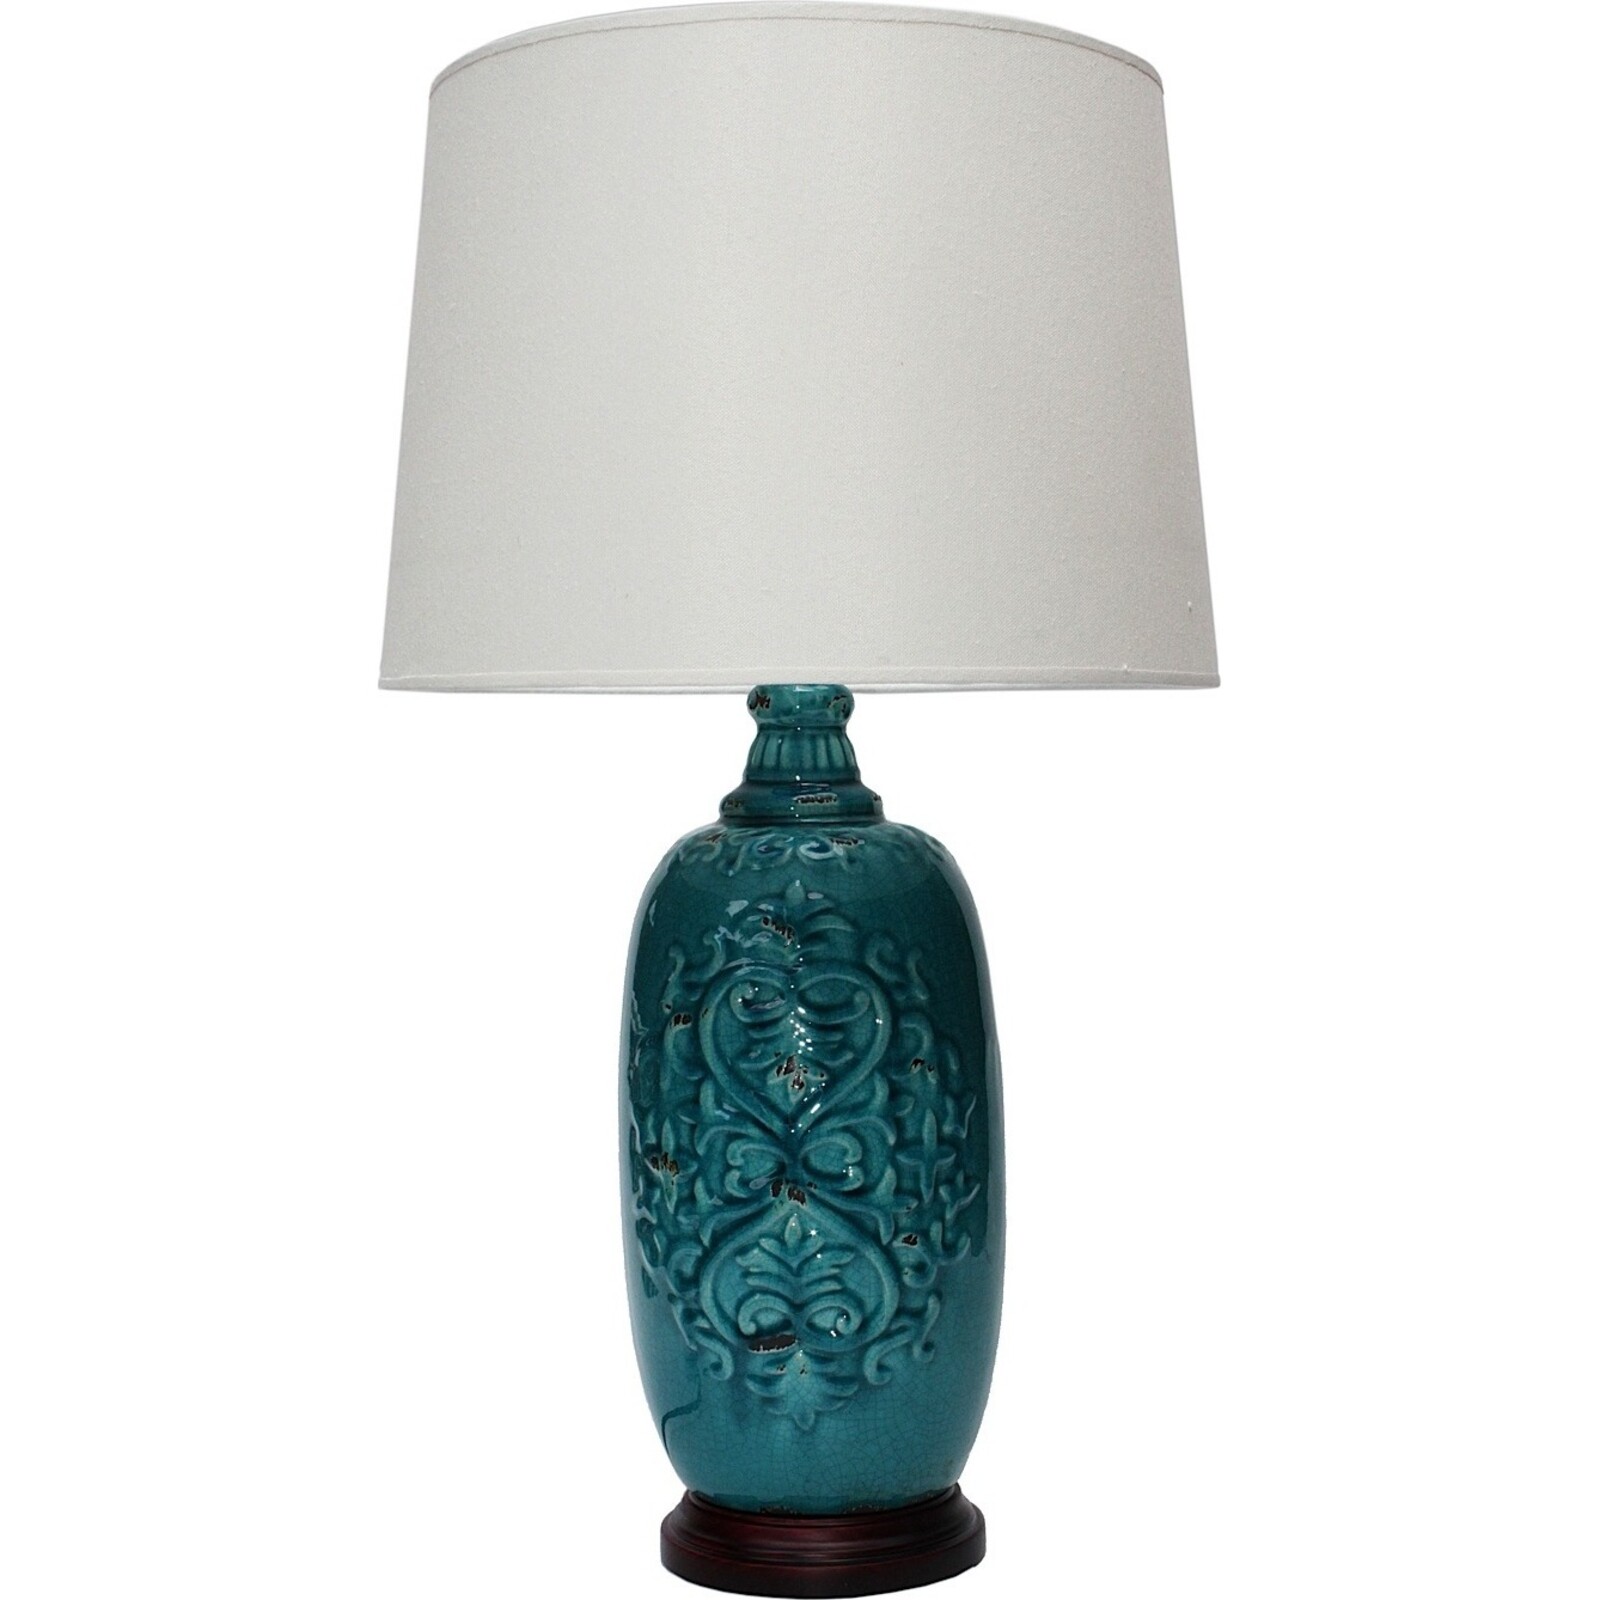 Table Lamp - Turquoise Motif